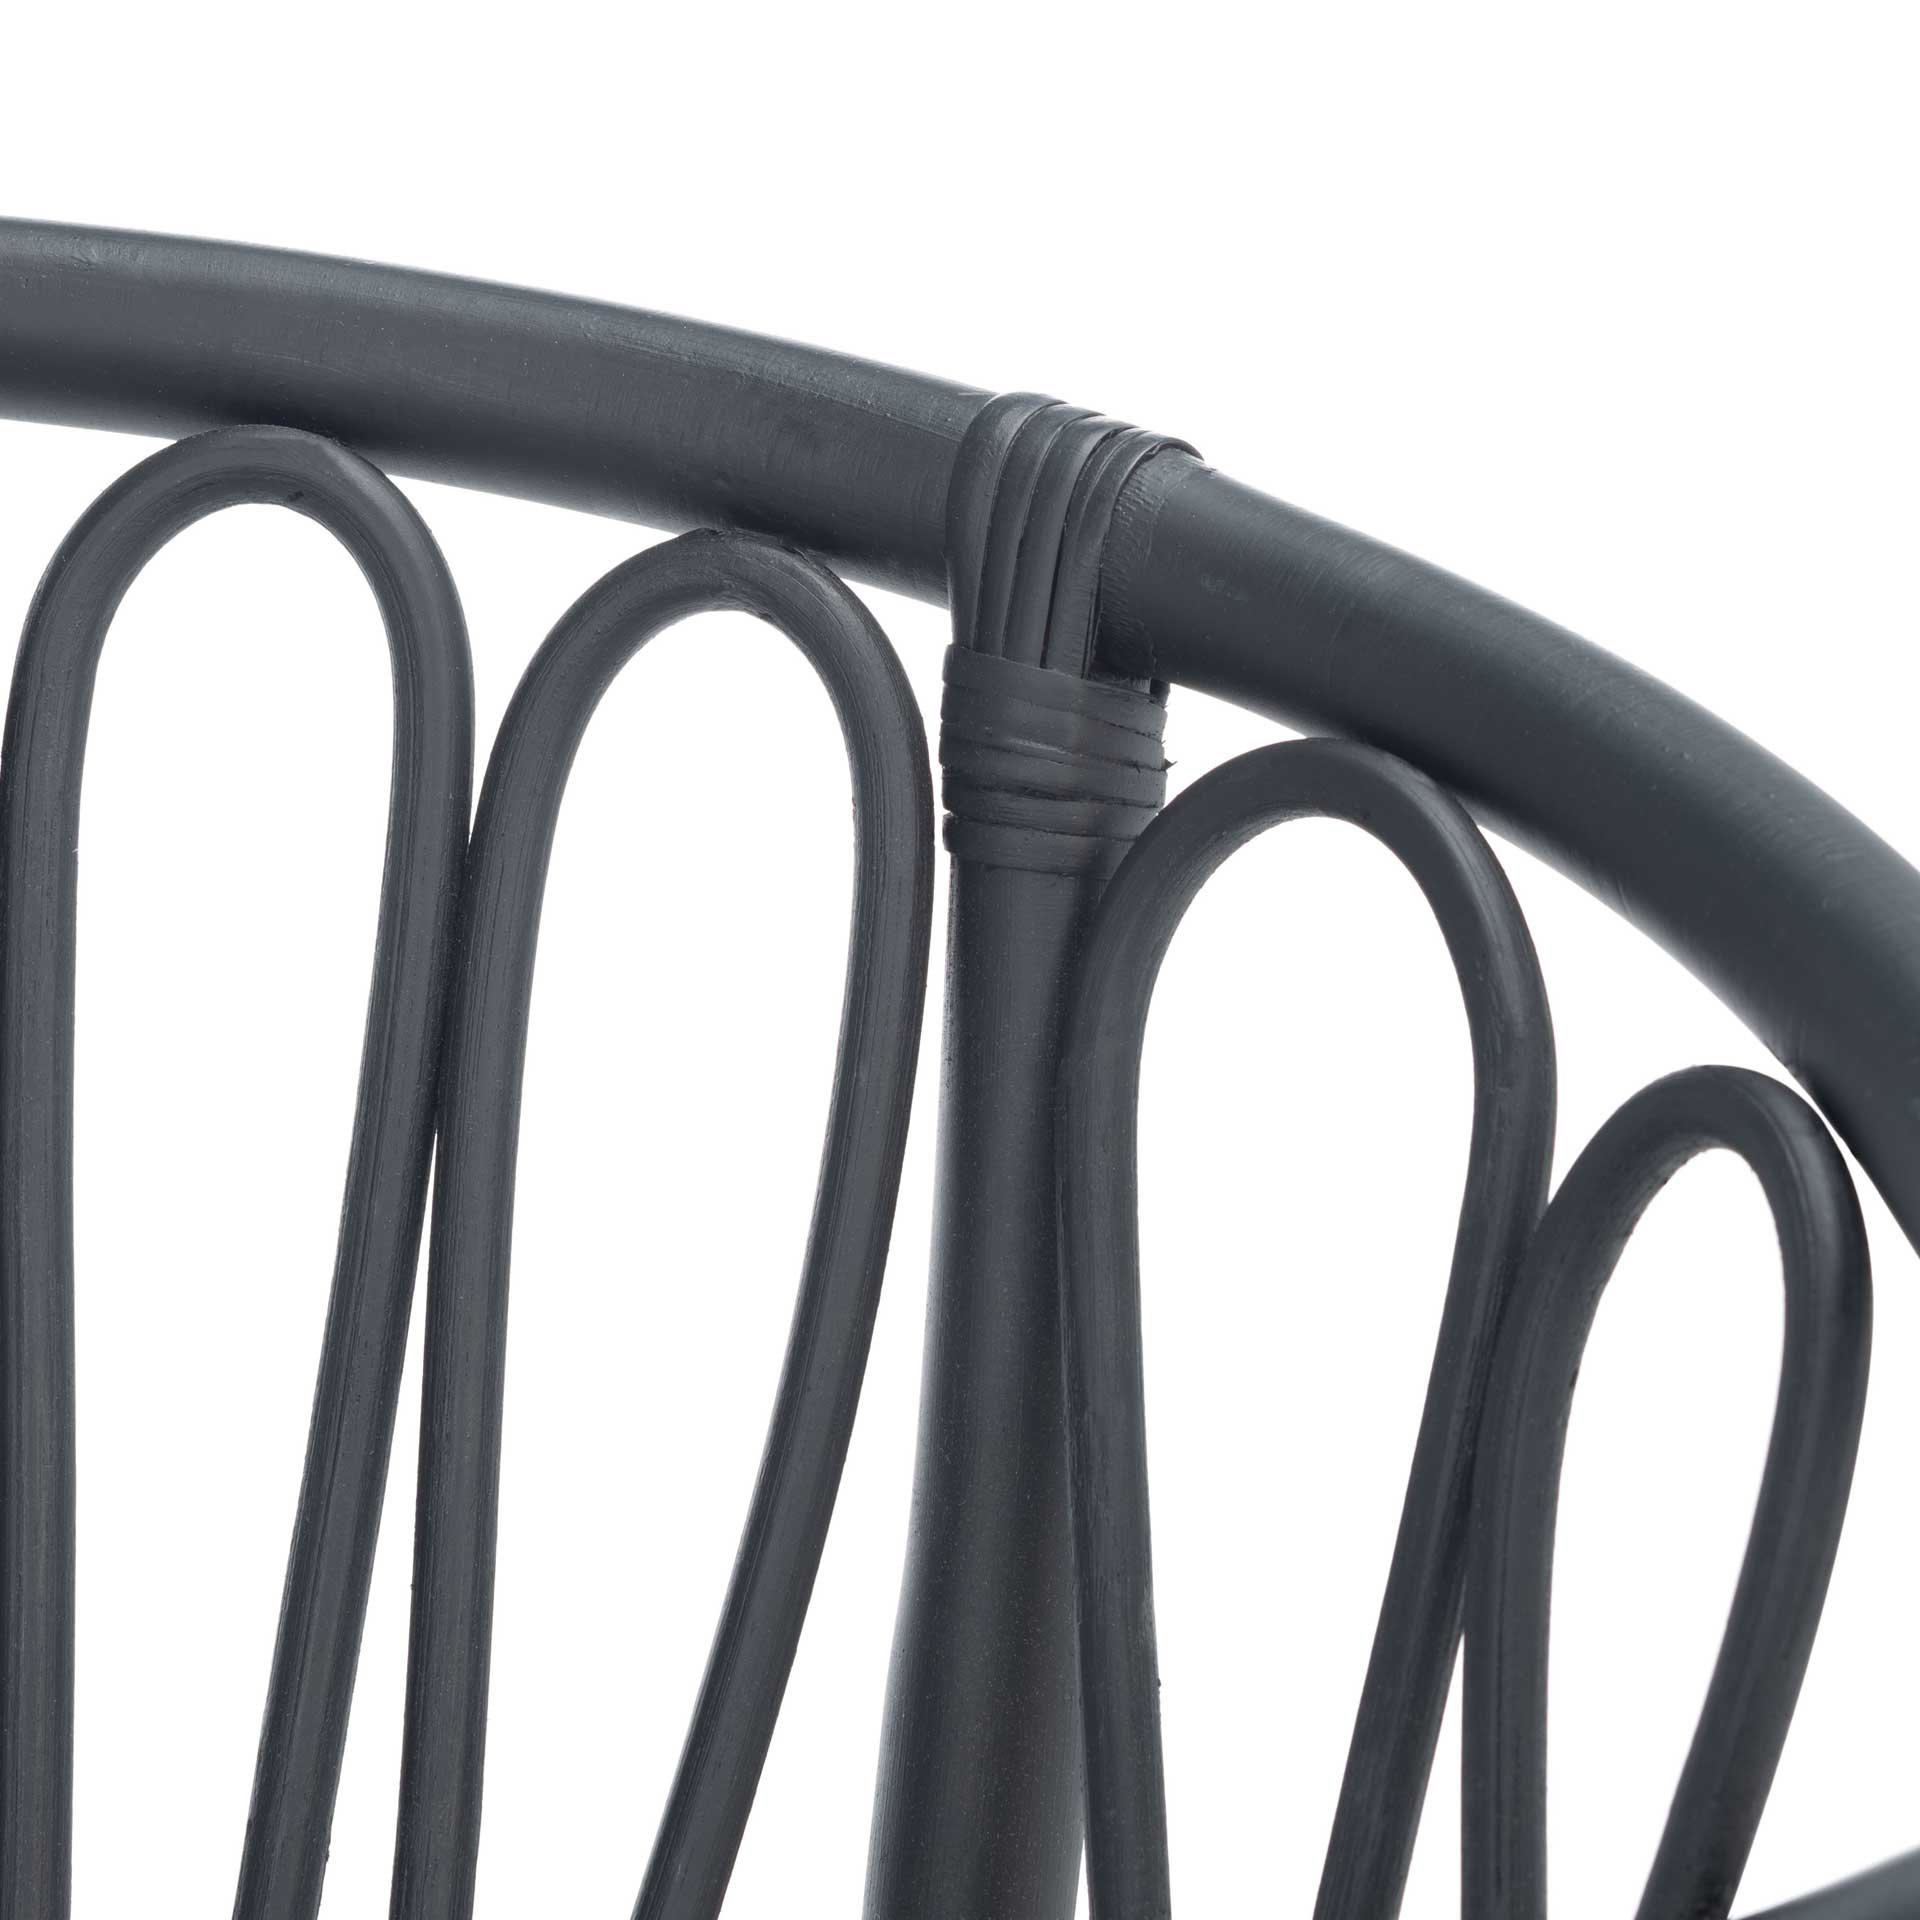 Spaced Rattan Dining Chair Black